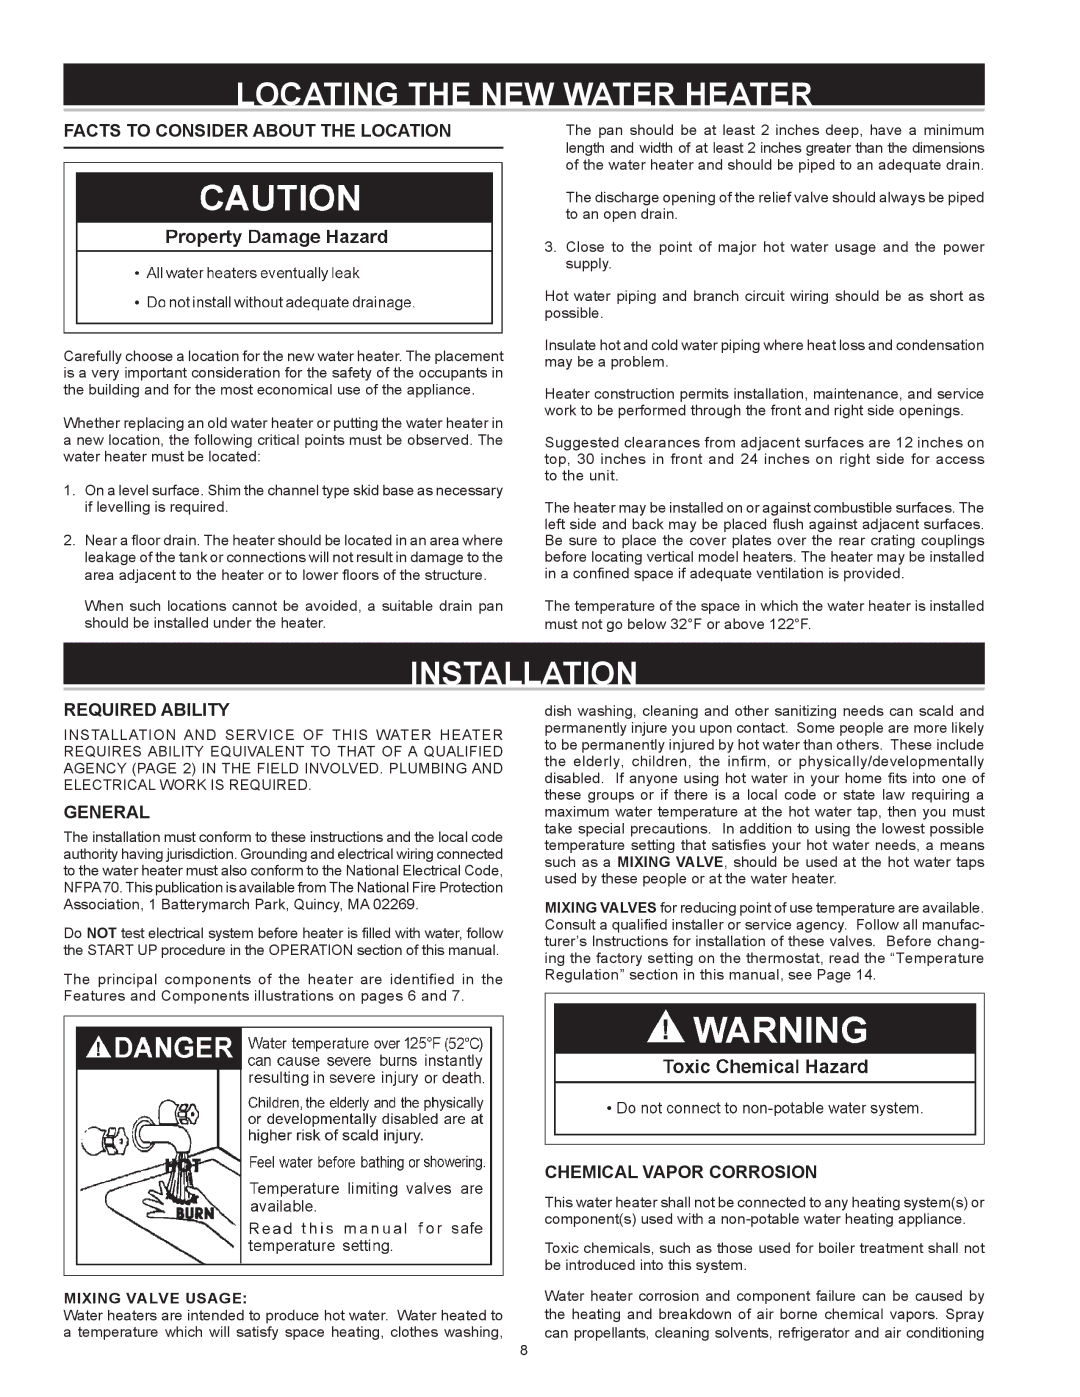 A.O. Smith DVE-150, DHE-200 instruction manual Locating the NEW Water Heater, Installation, Required Ability 